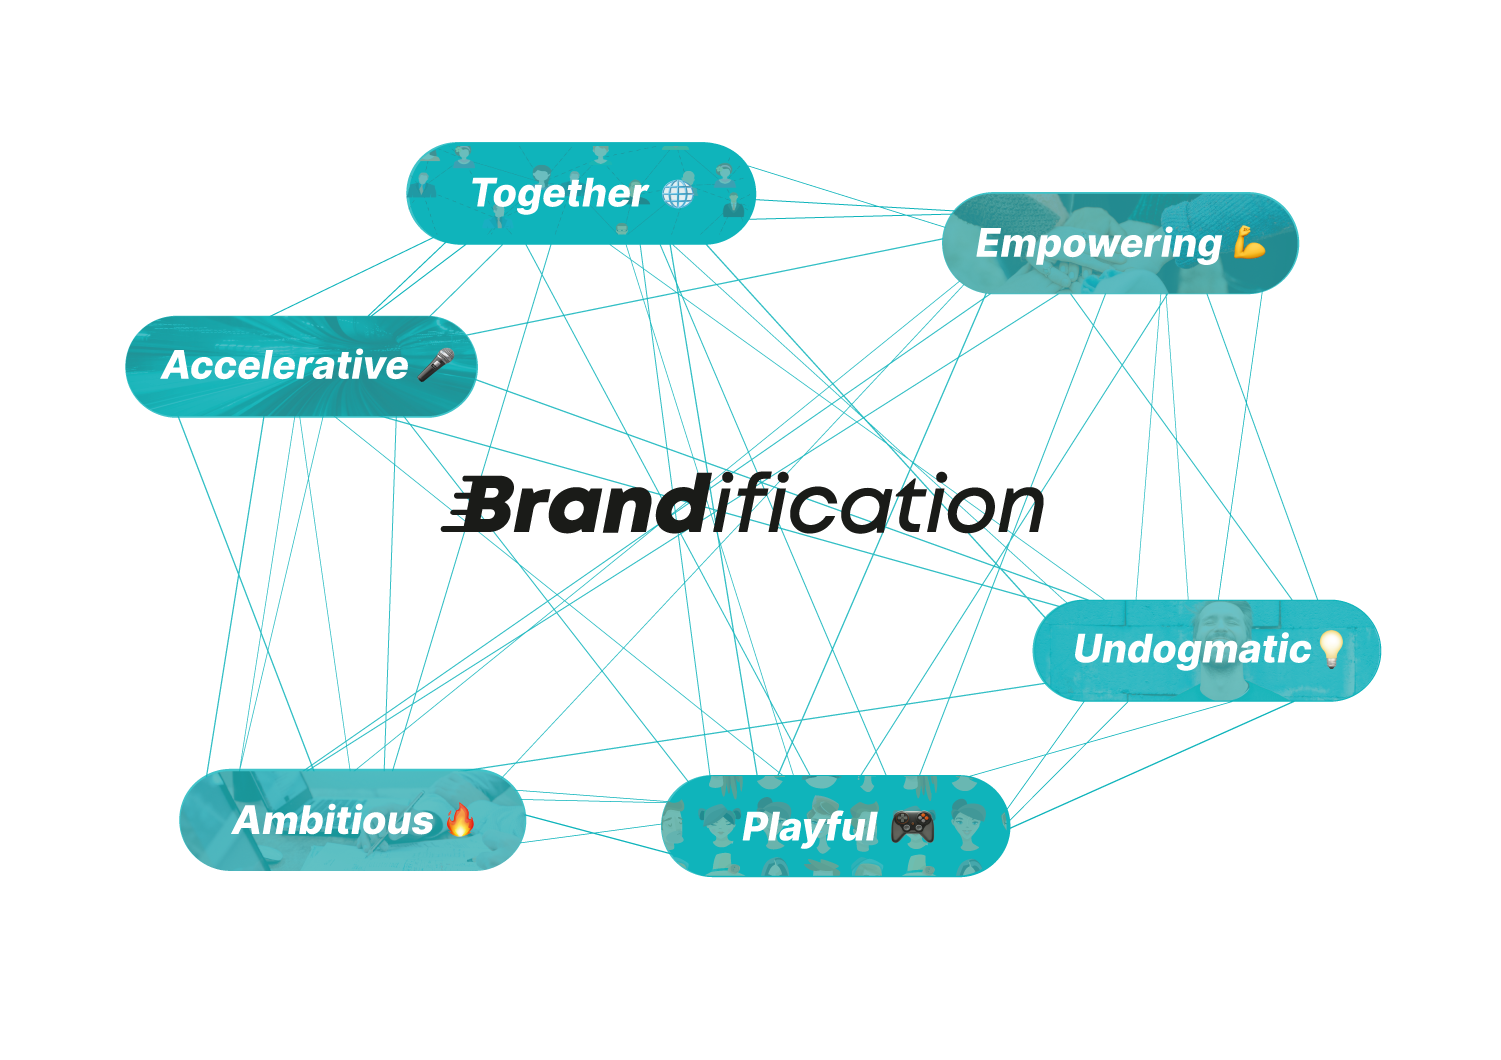 The brand values of Brandification